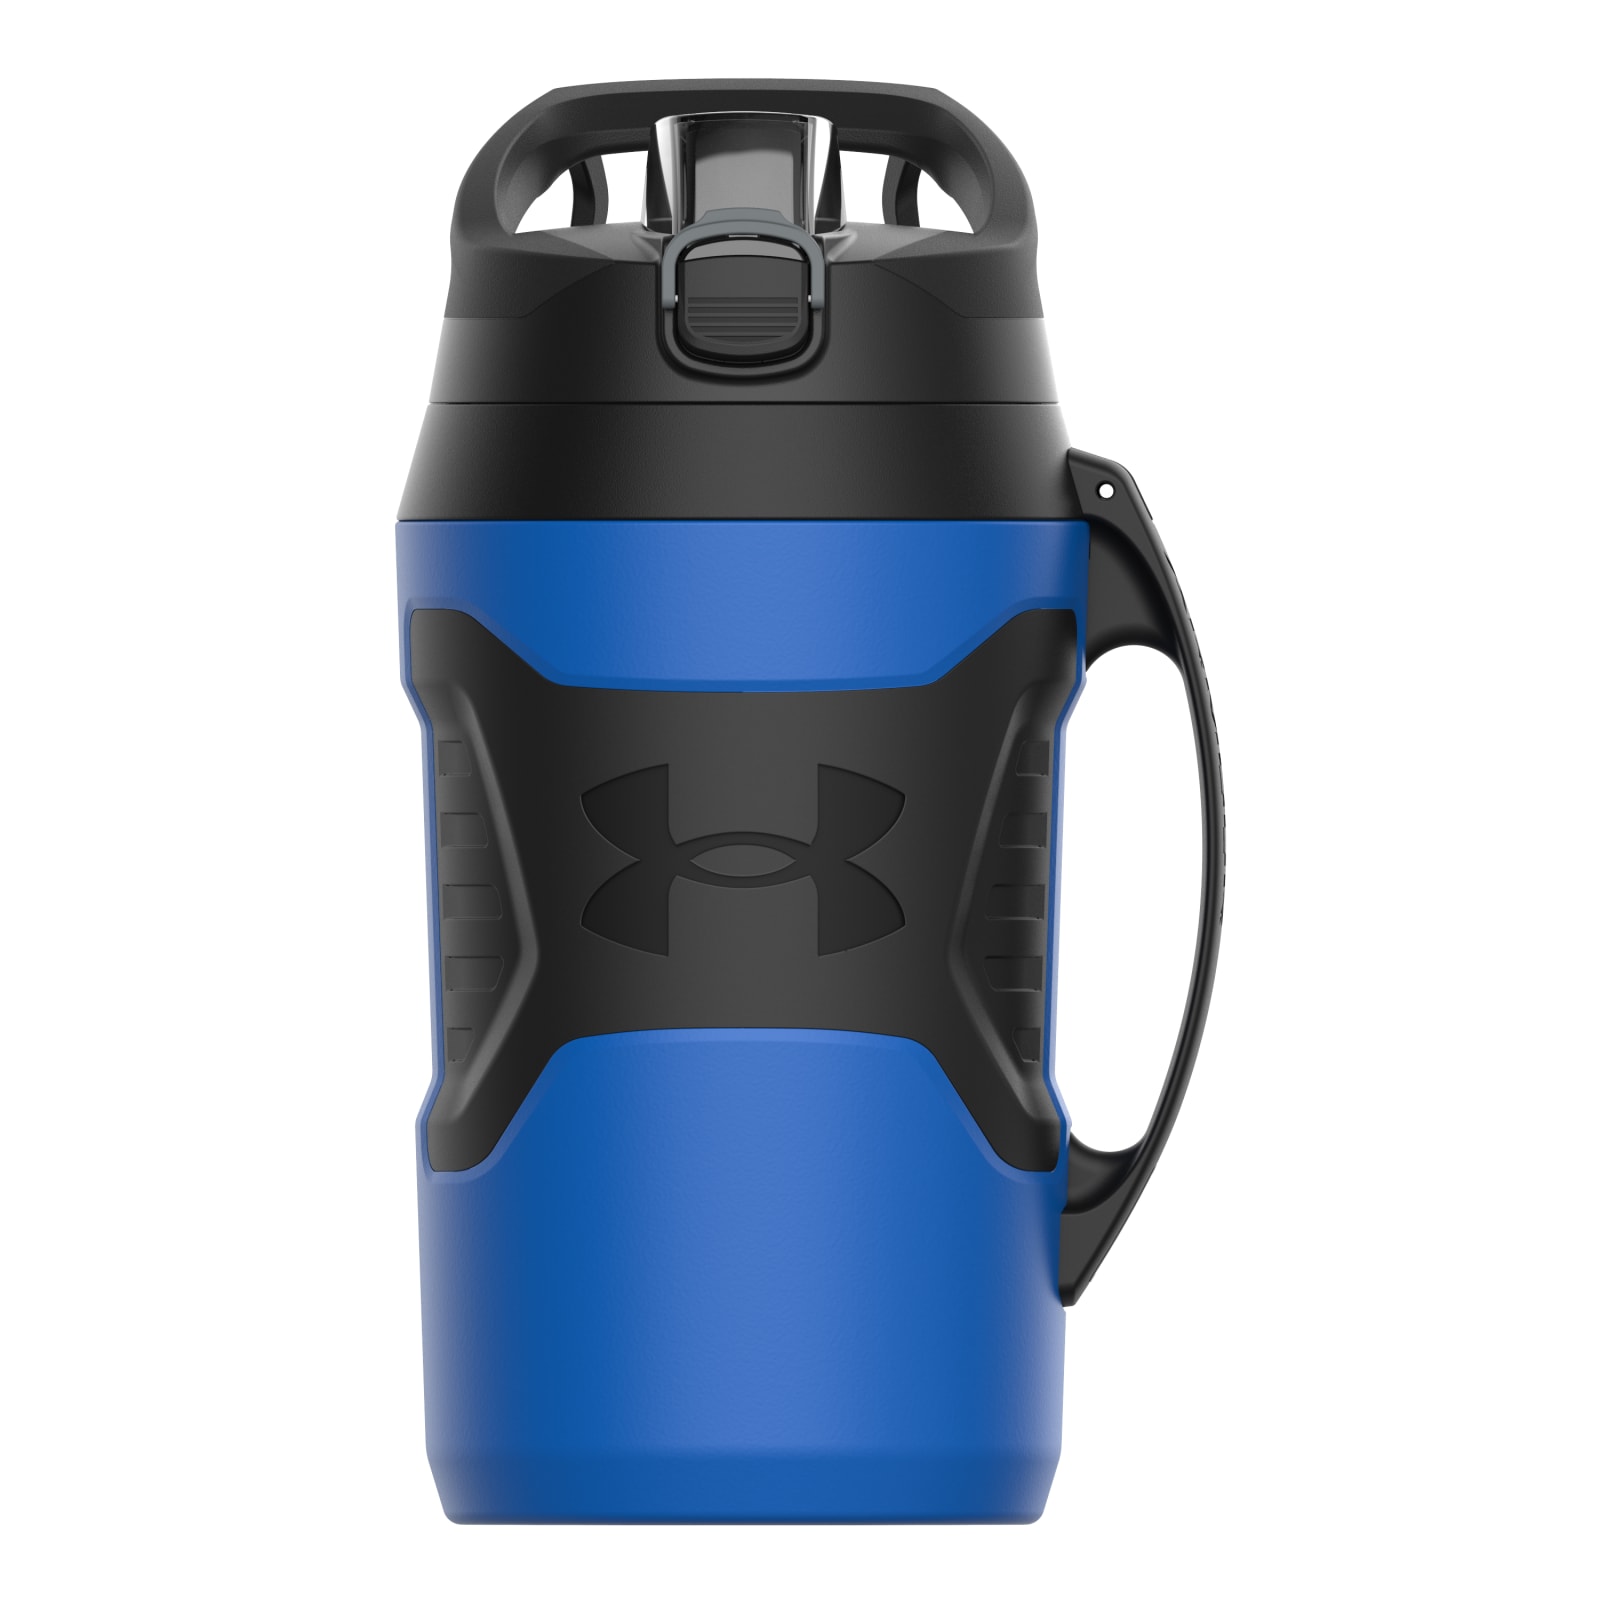 64 oz Royal Playmaker Jug Water Bottle by Under Armour at Fleet Farm